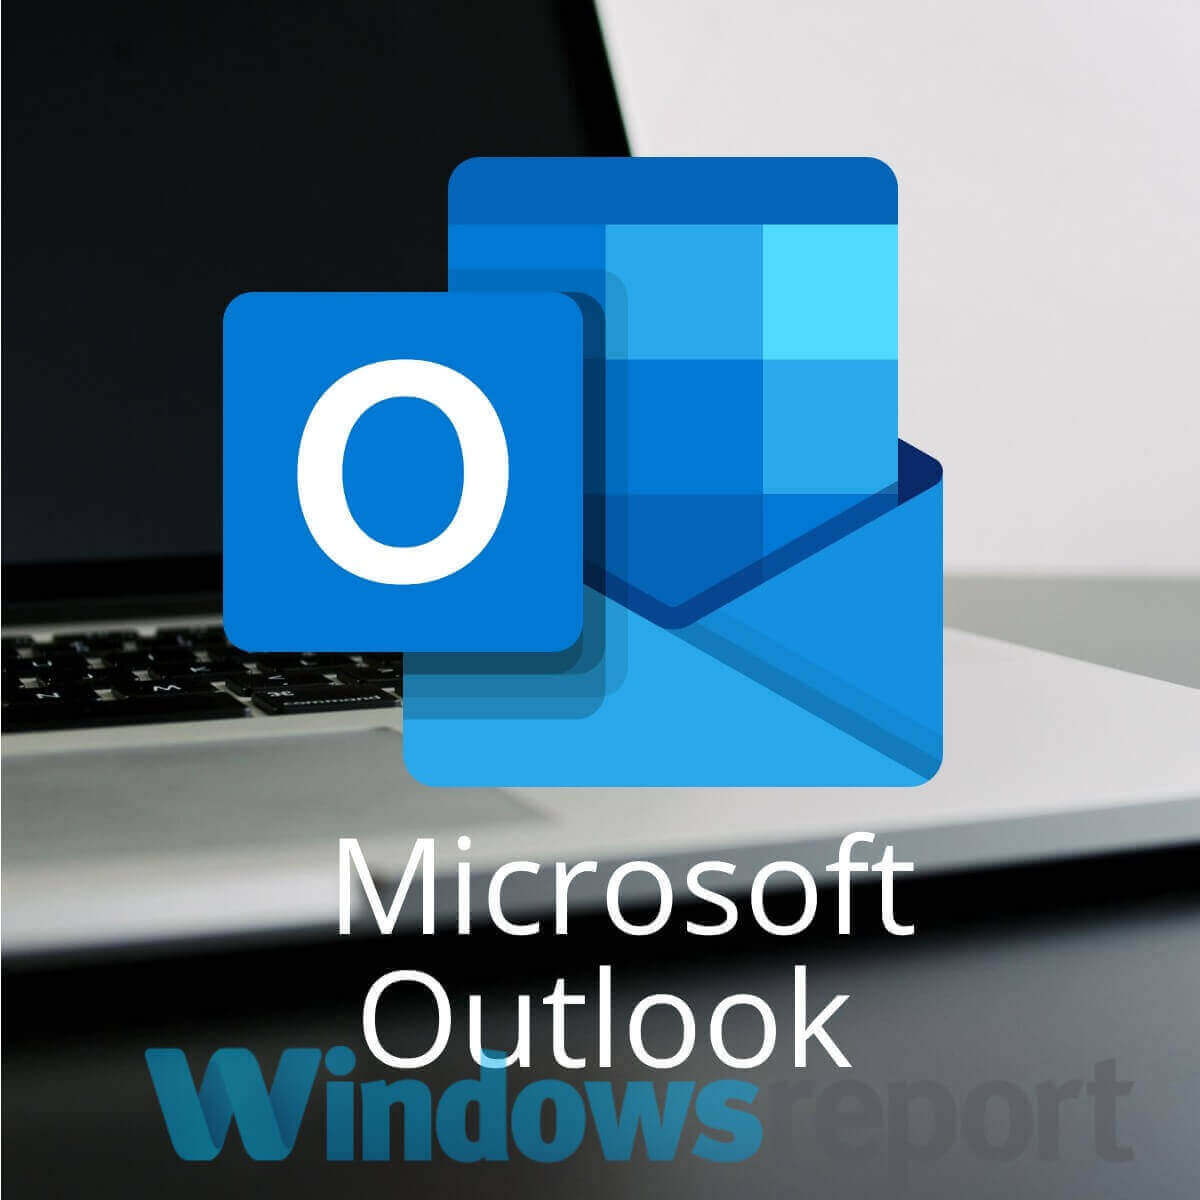 Microsoft Outlook to get full support for Black Office Theme